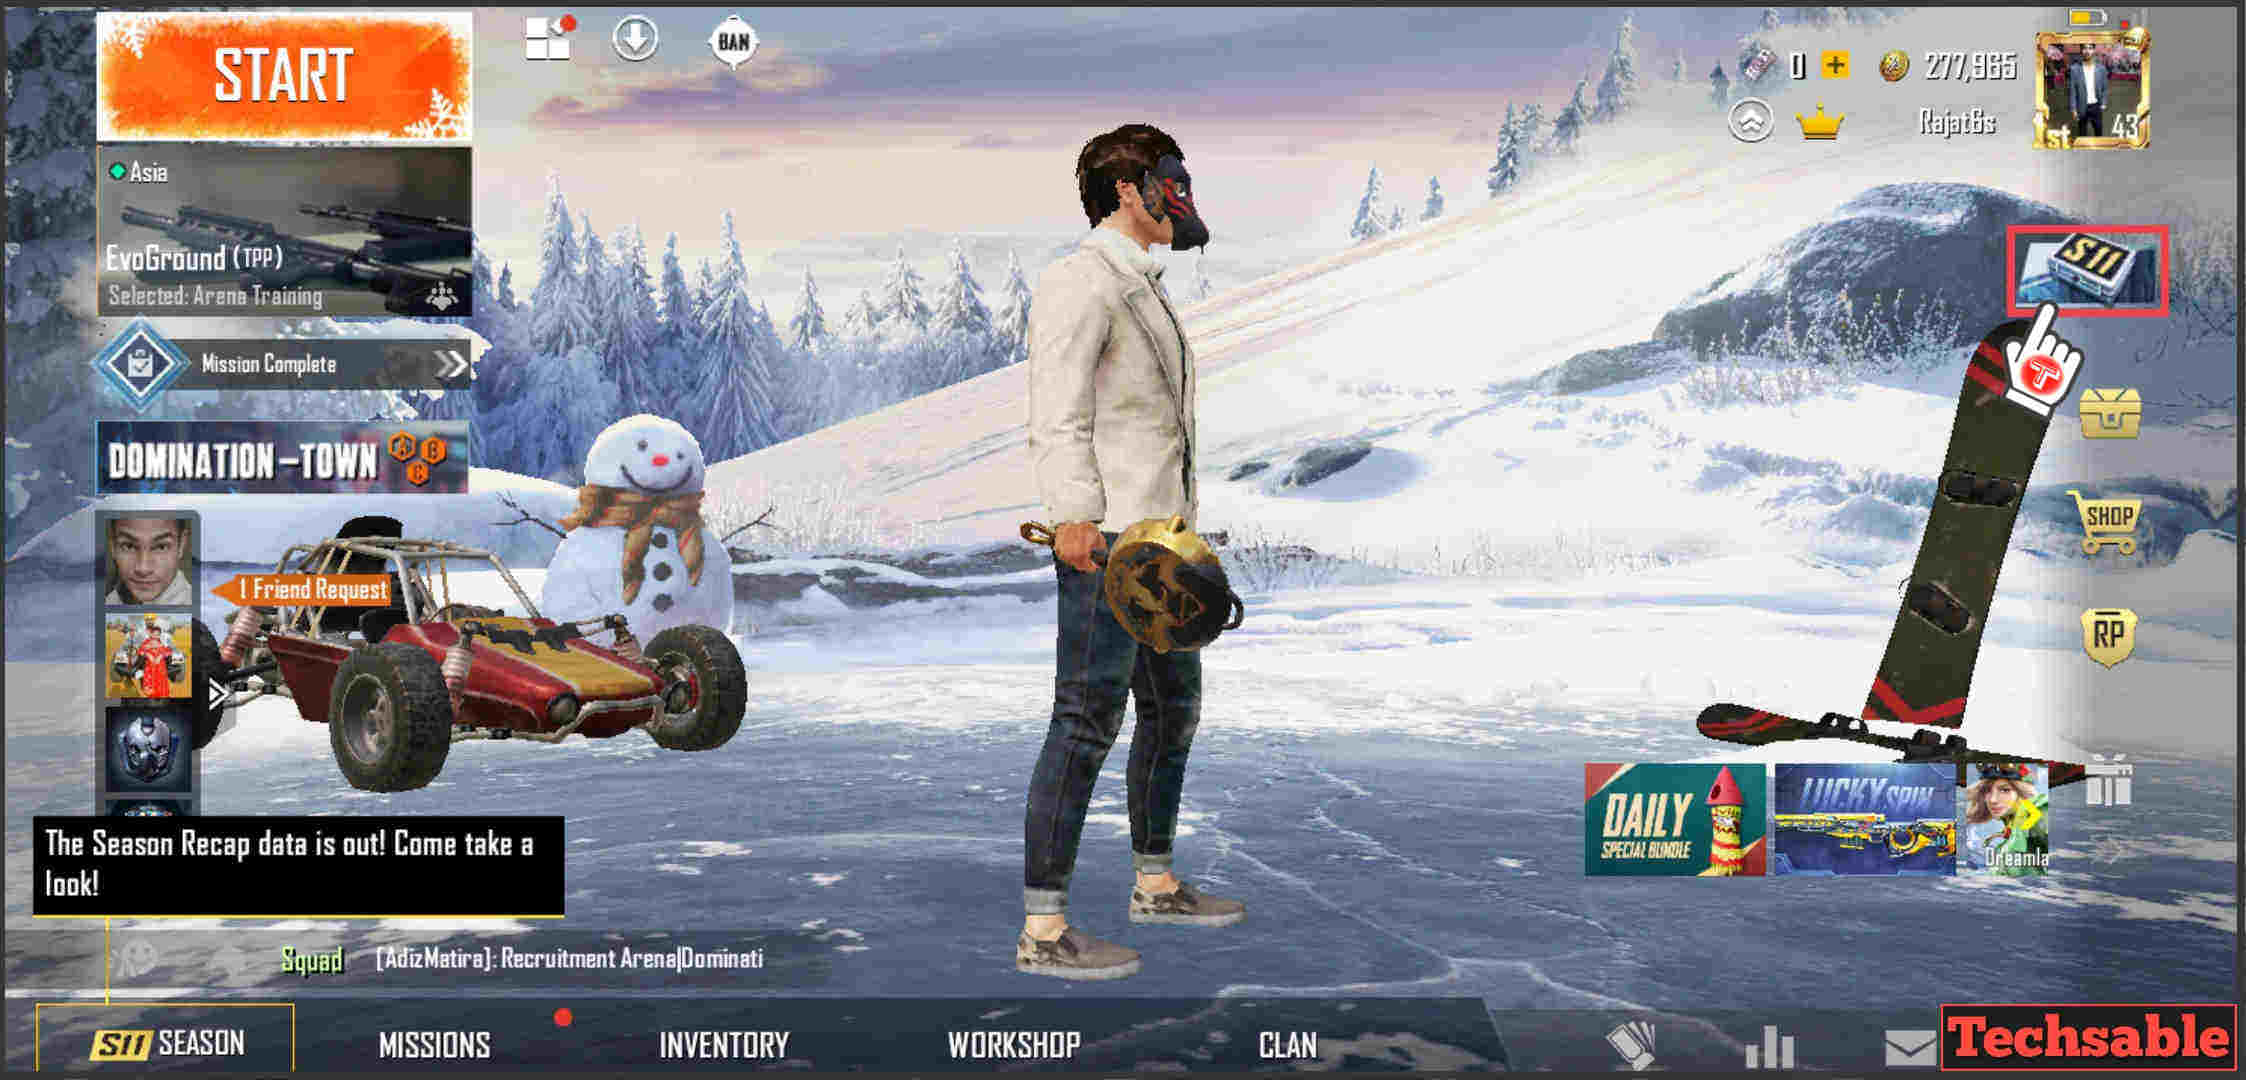 Free Skins in PUBG Mobile